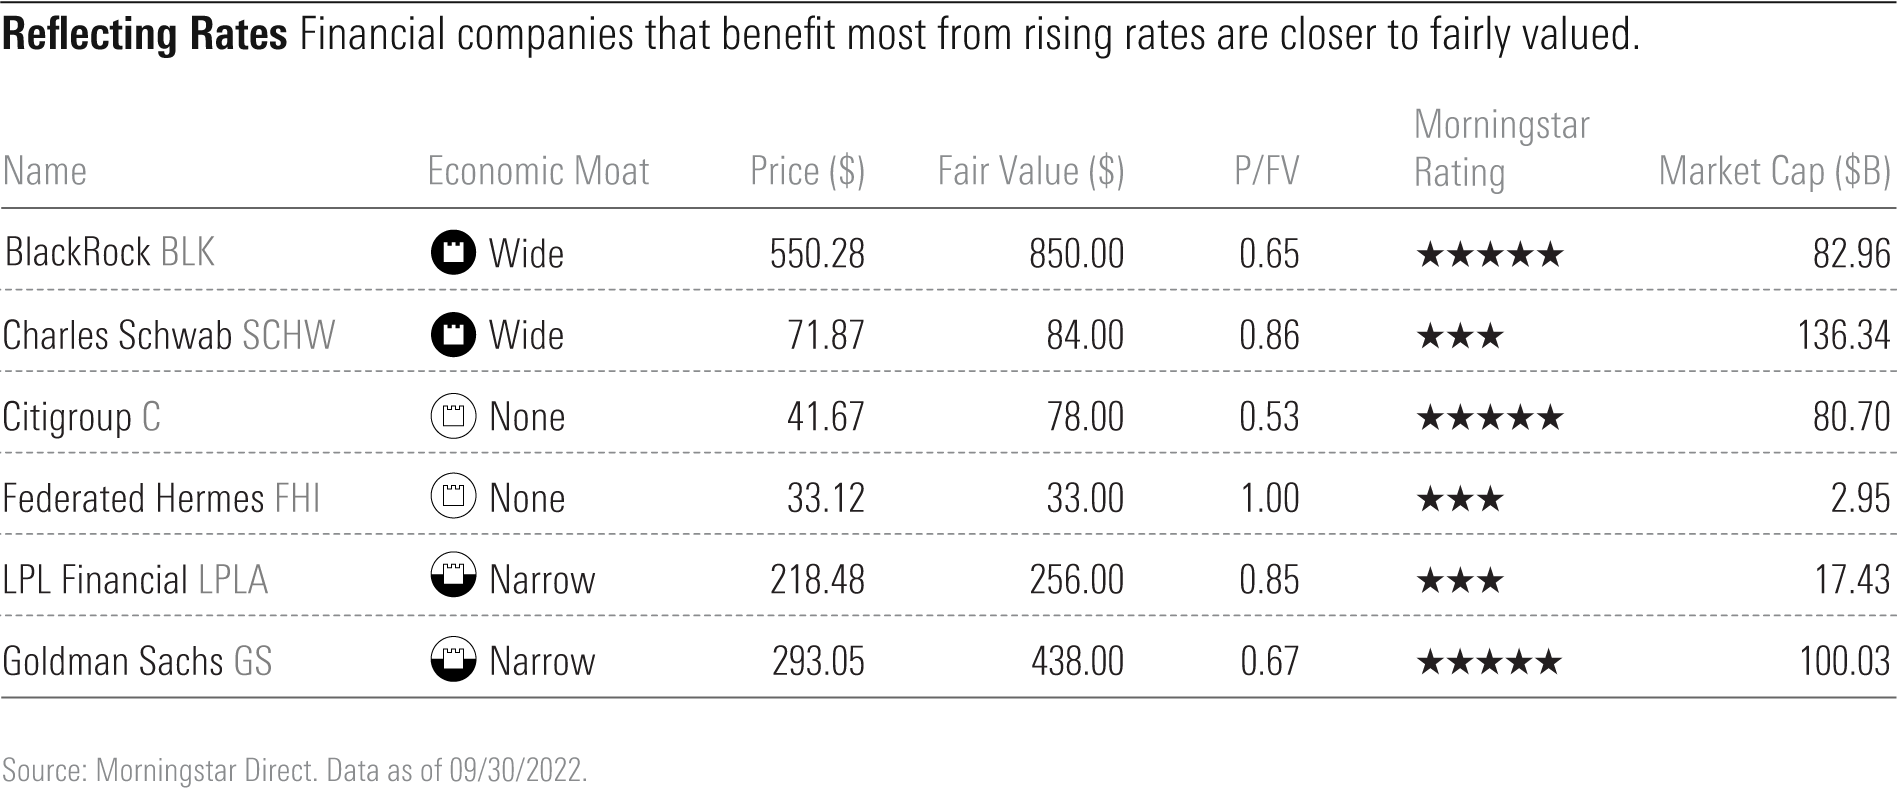 This table shows a list of financial companies that benefit most from rising interest rates.